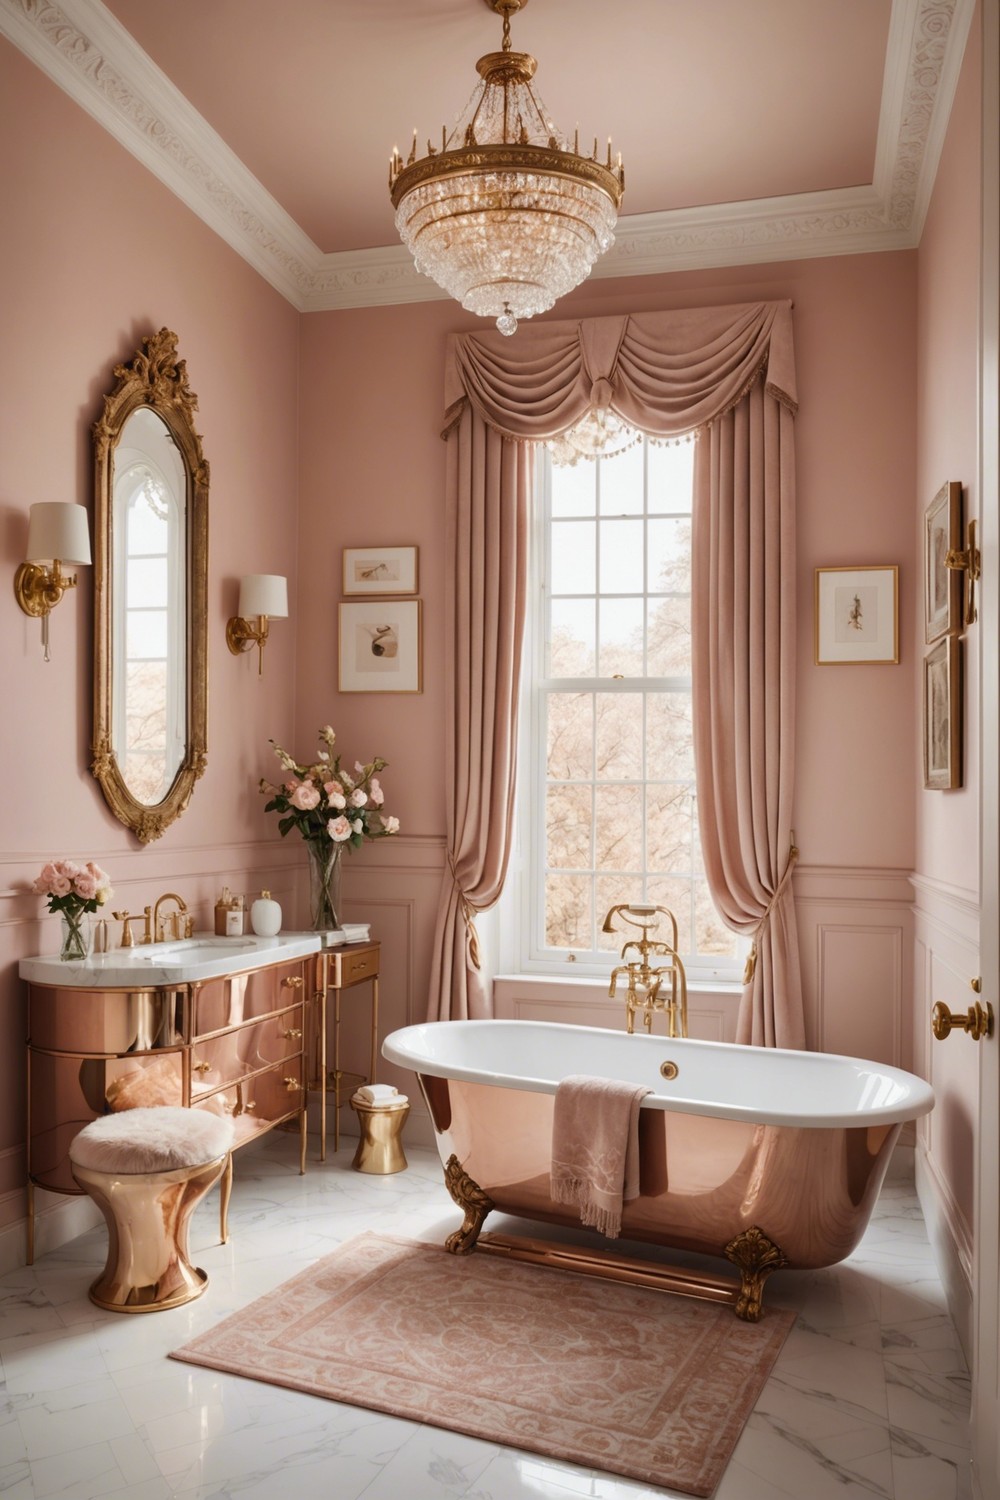 Rose Gold Rush: Metallic Accents for a Luxurious Look